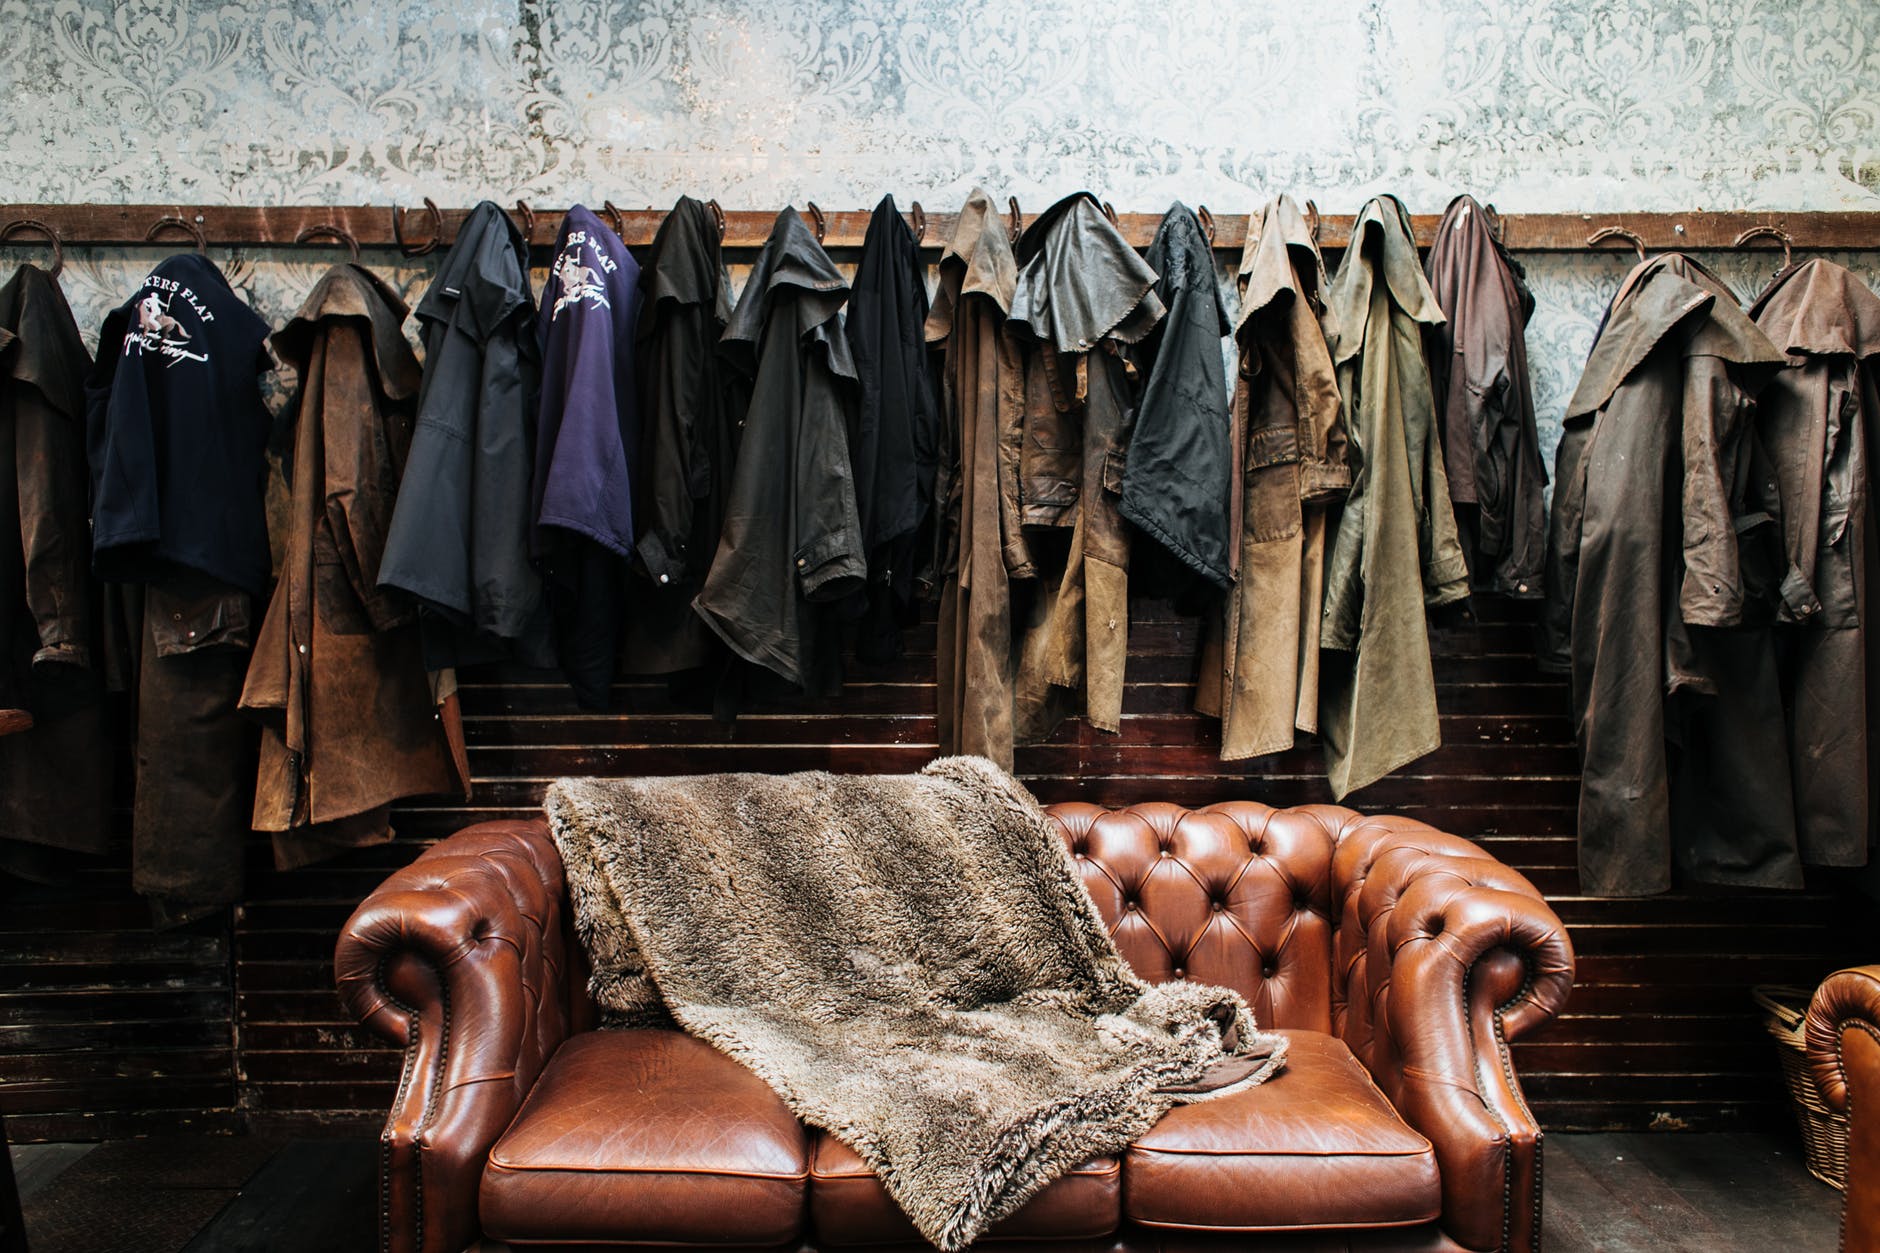 5 ways to preserve and clean leather goods that do not explode, mold, or peel